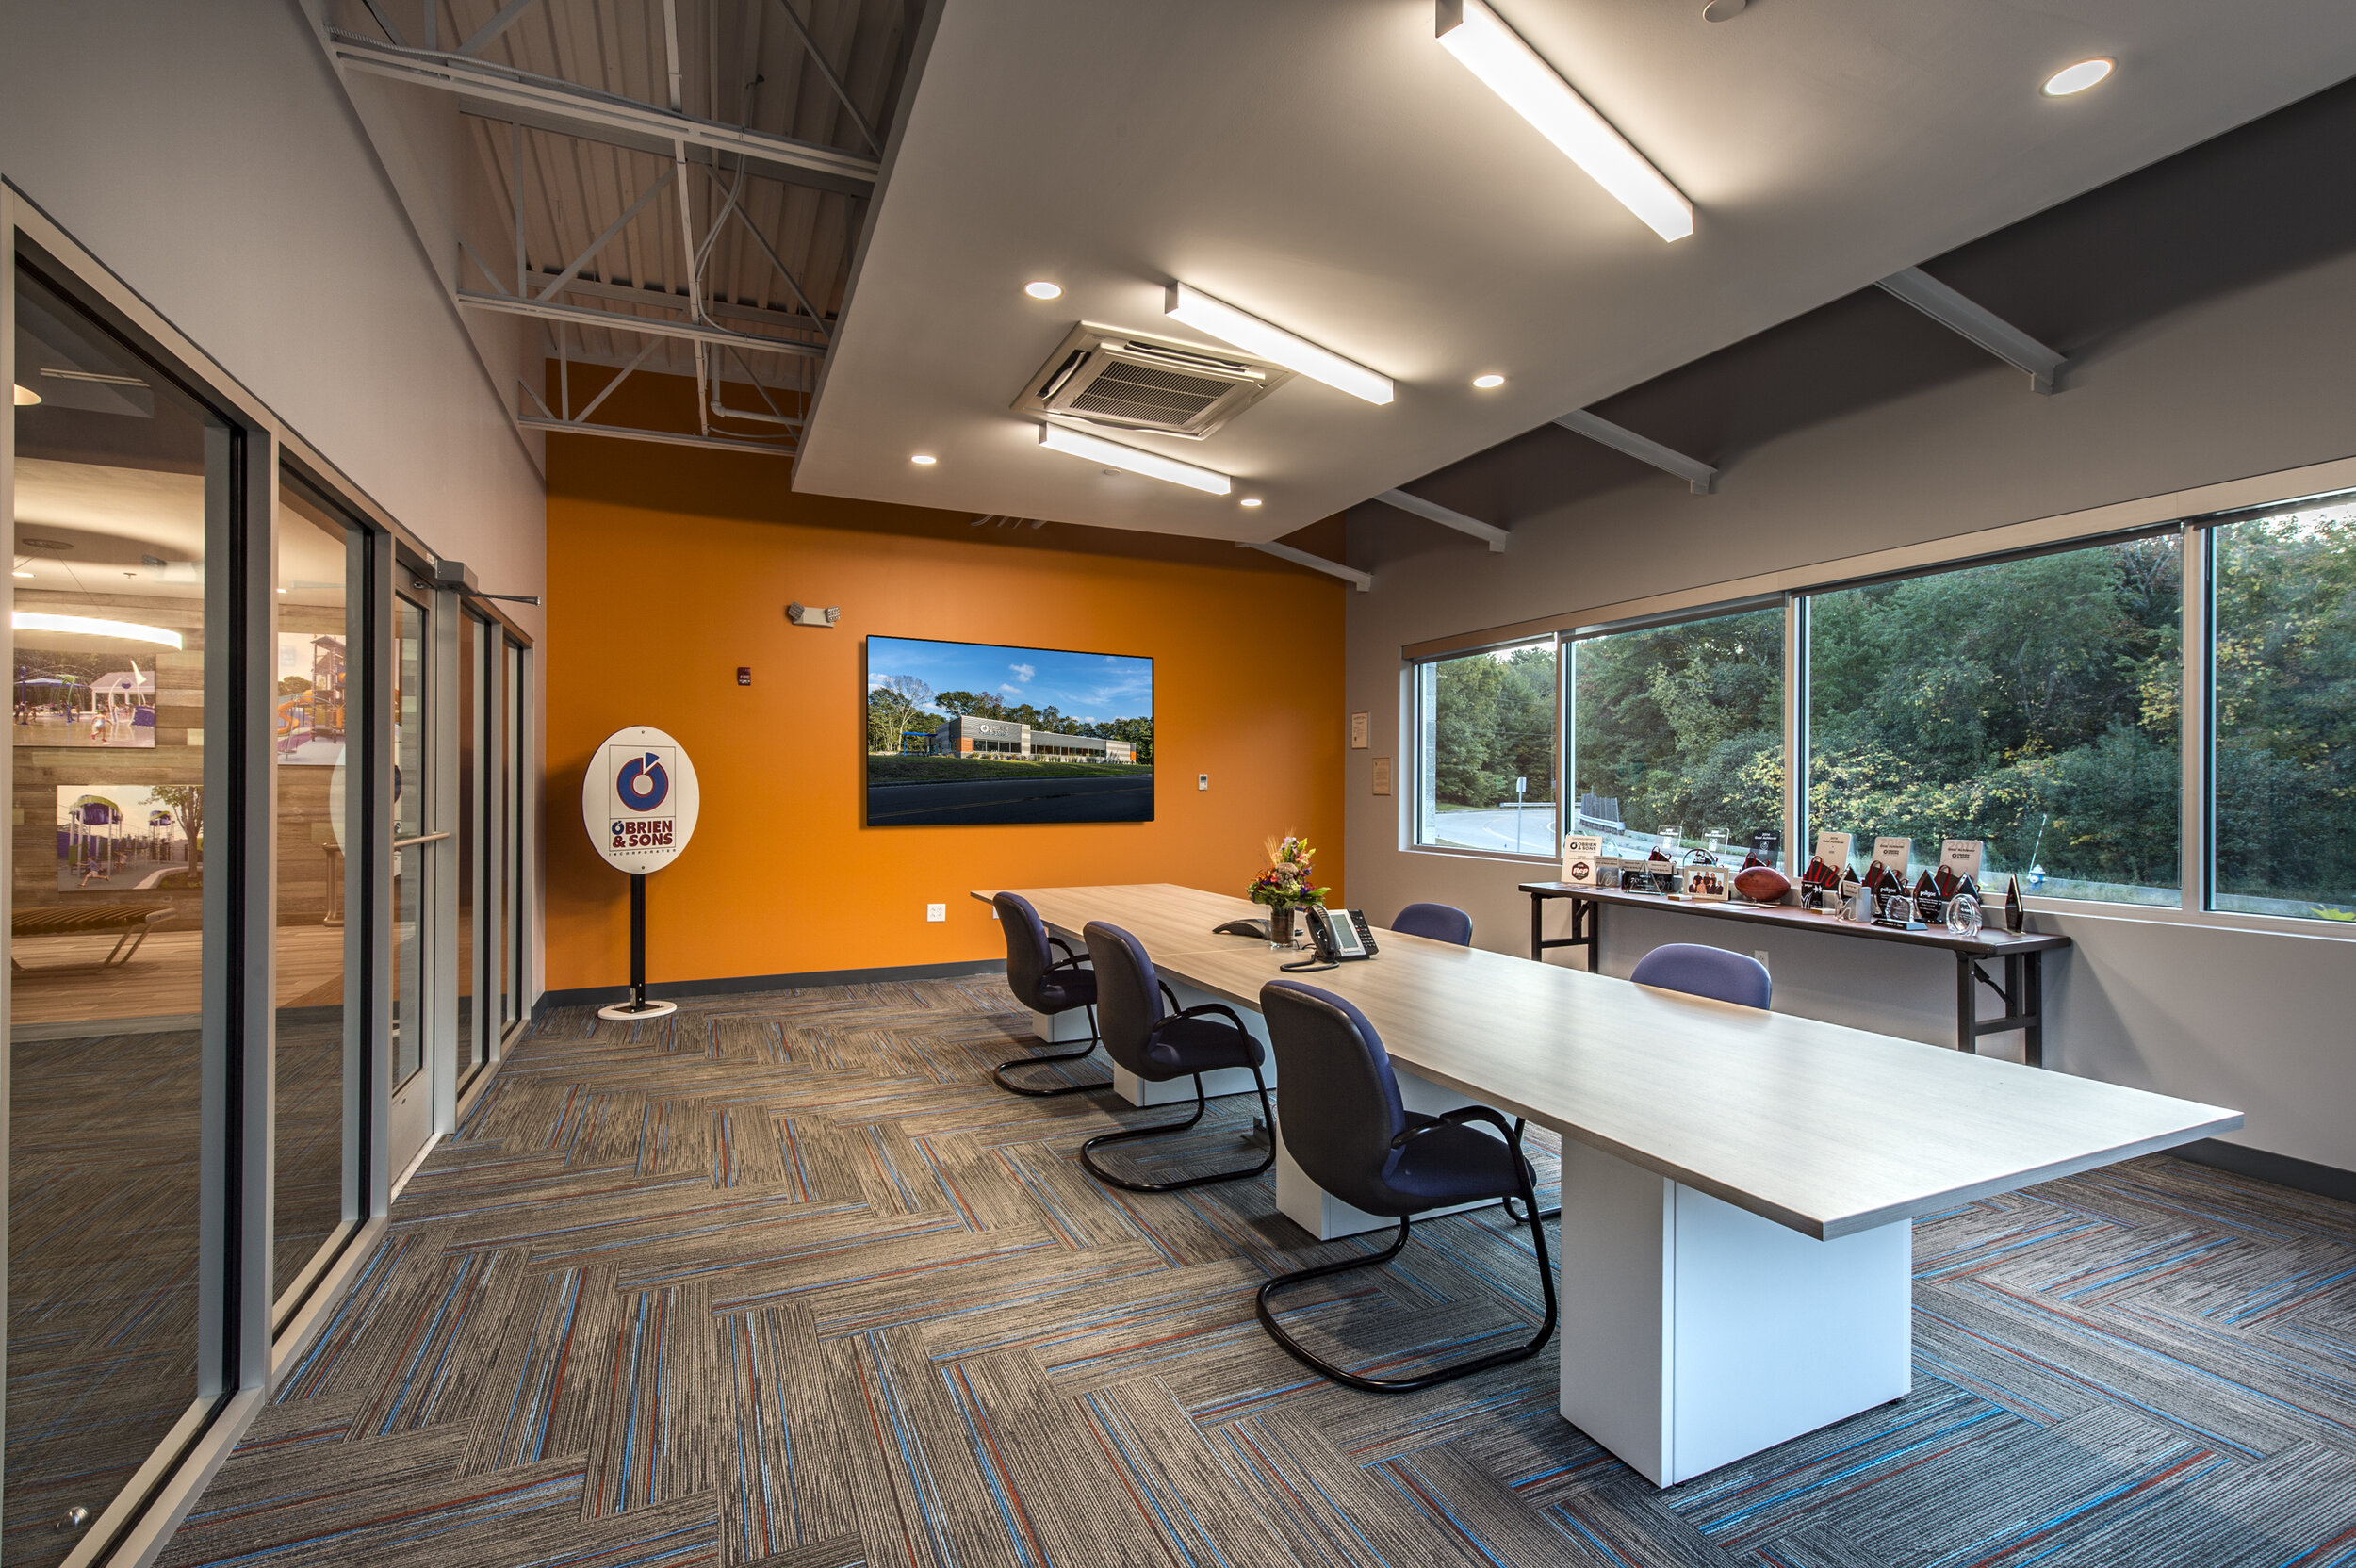  Corporate conference room  